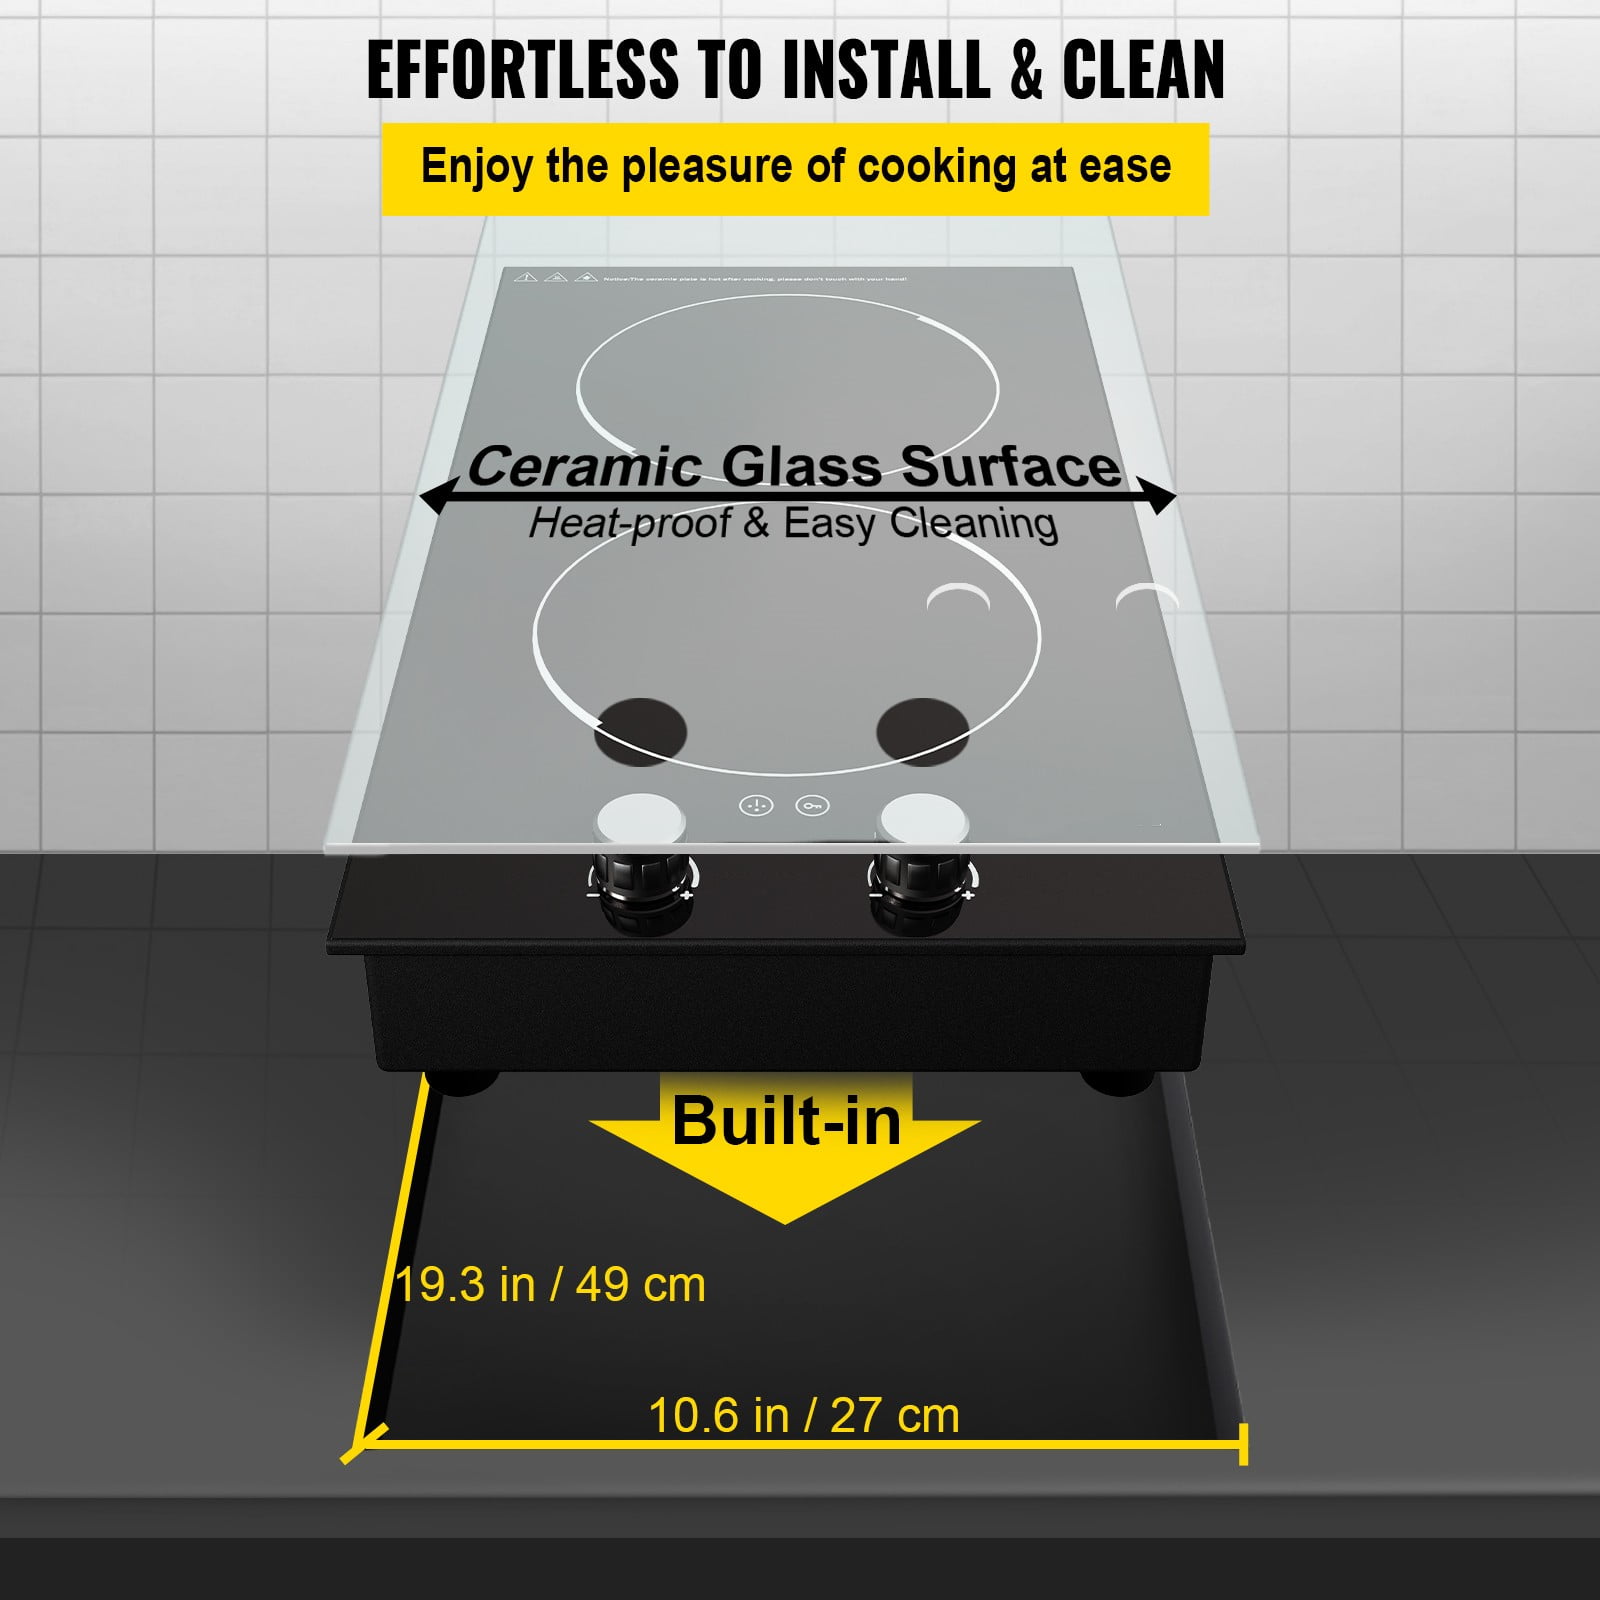 How to Install a Gas, Electric or Induction Cooktop